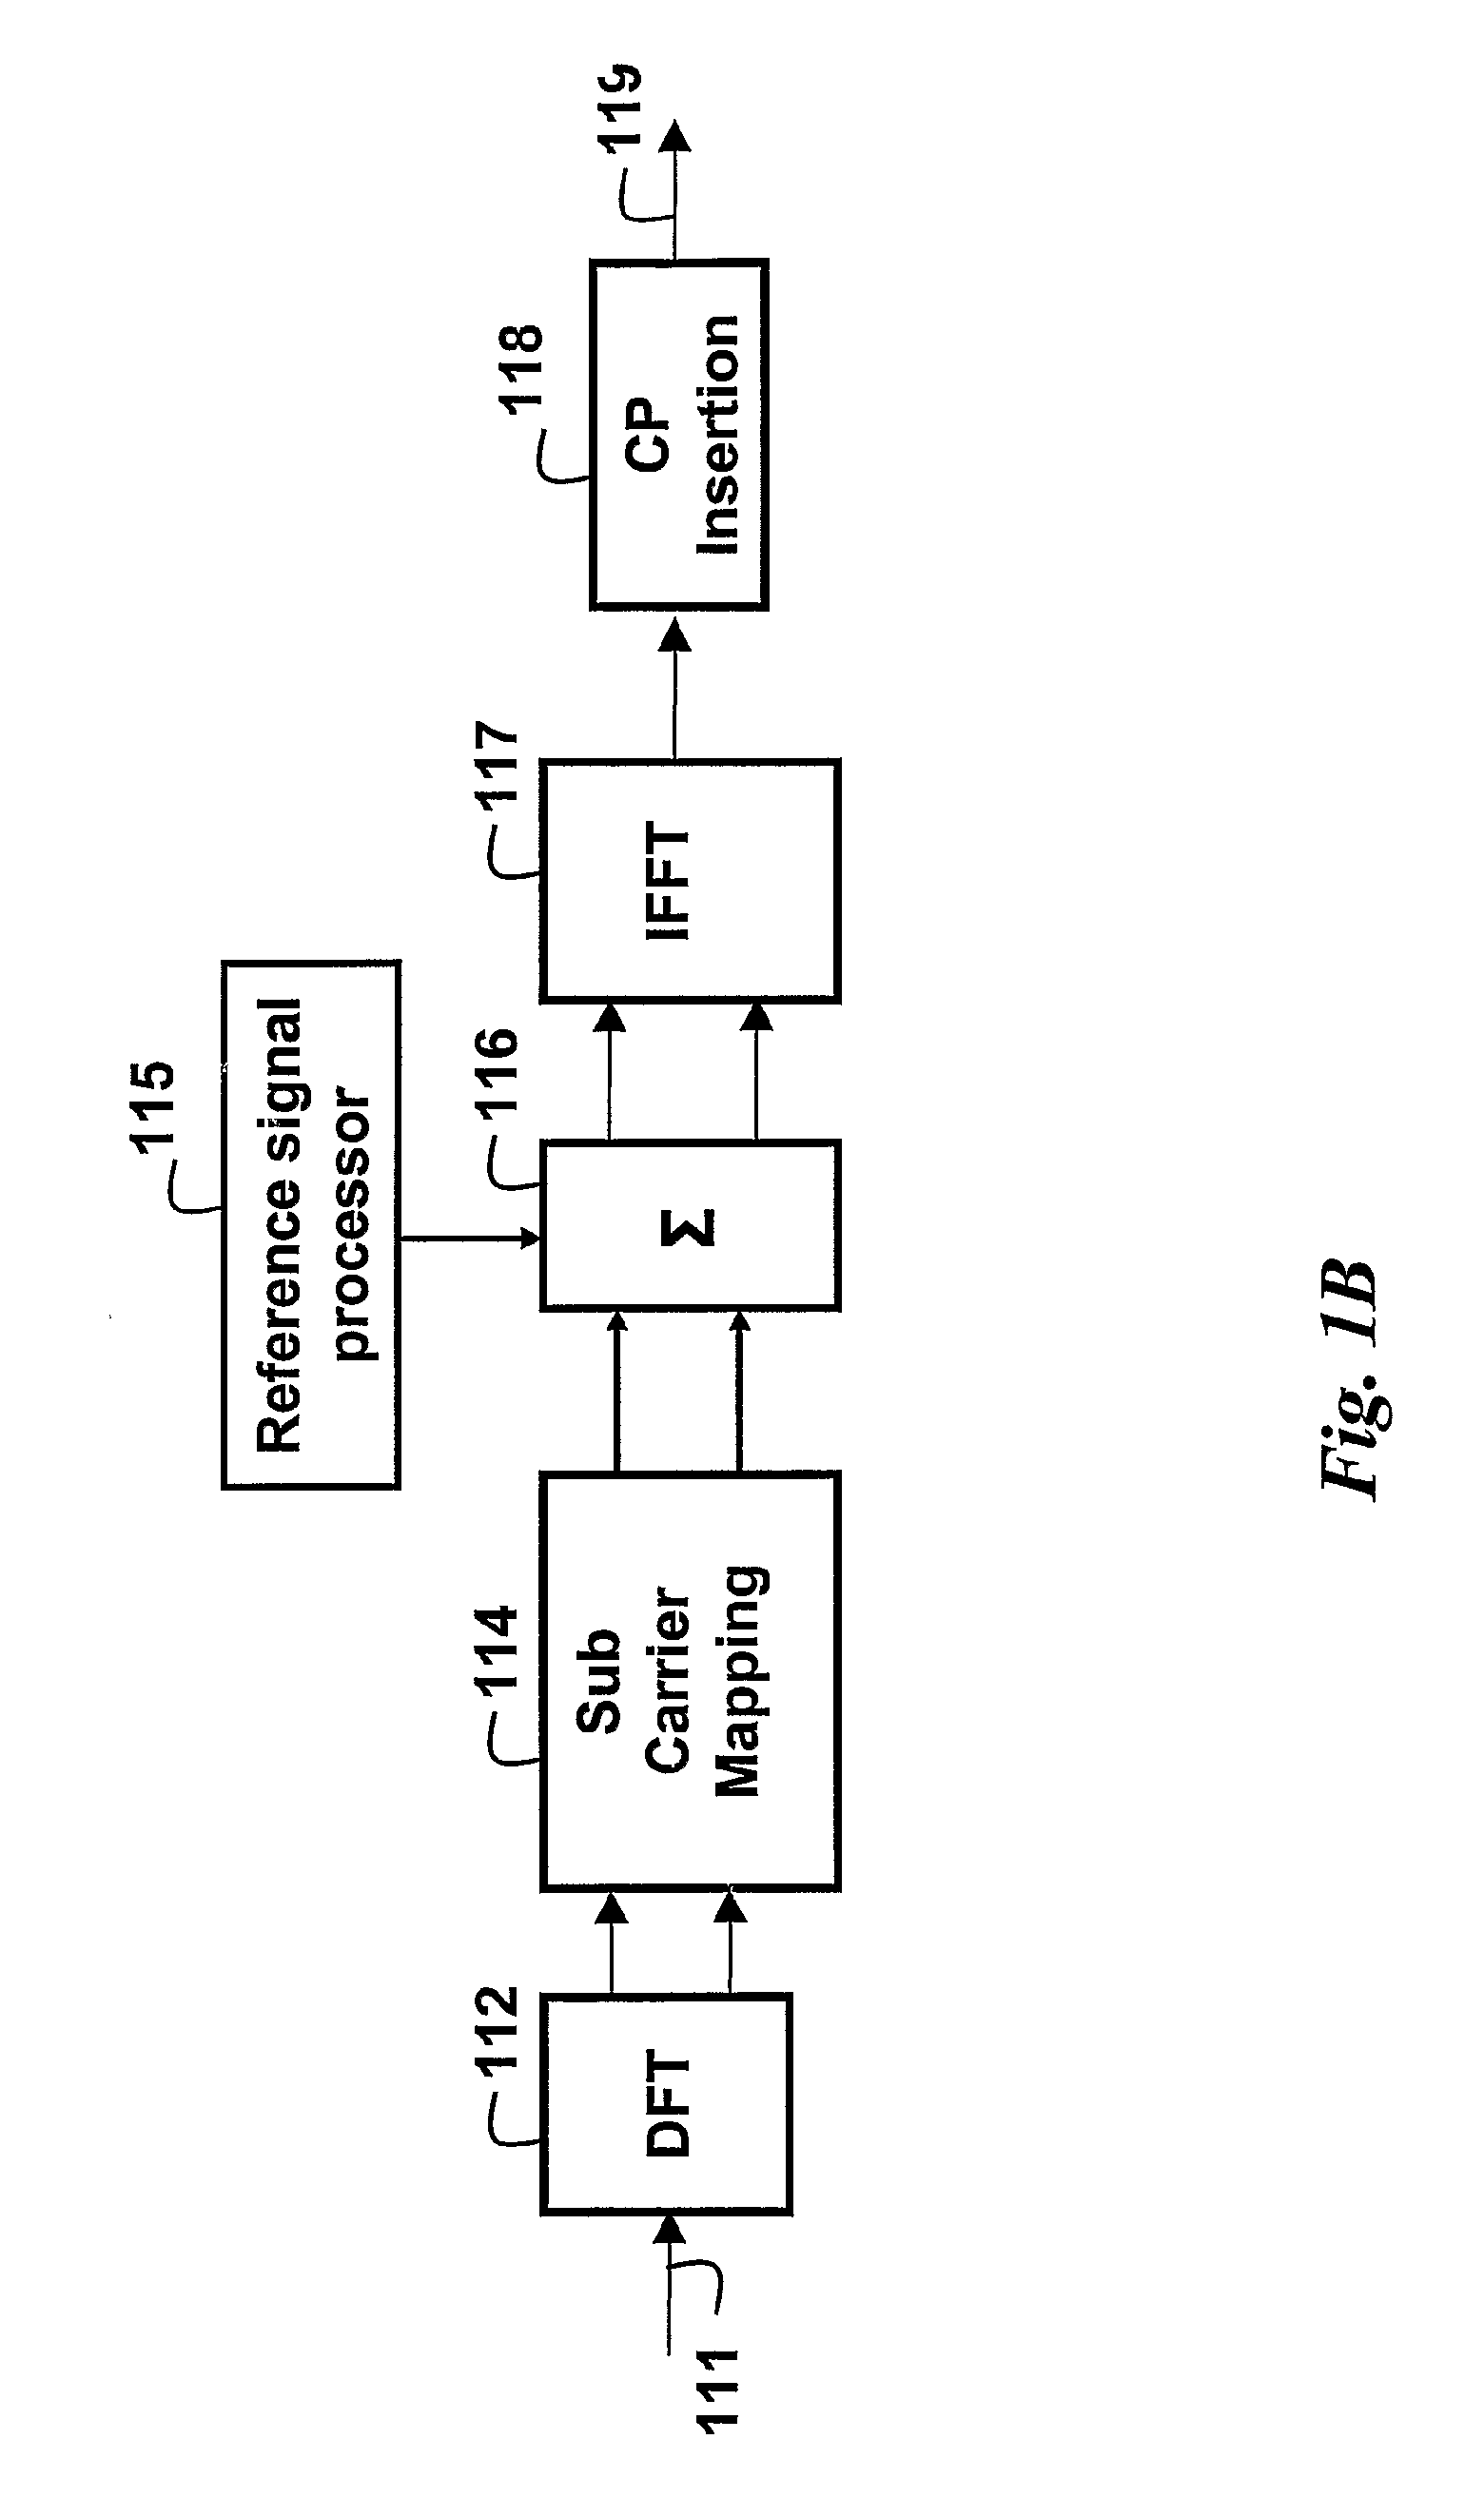 Method and System for Processing Reference Signals in OFDM Systems Using Transmission Time Interval Groupings